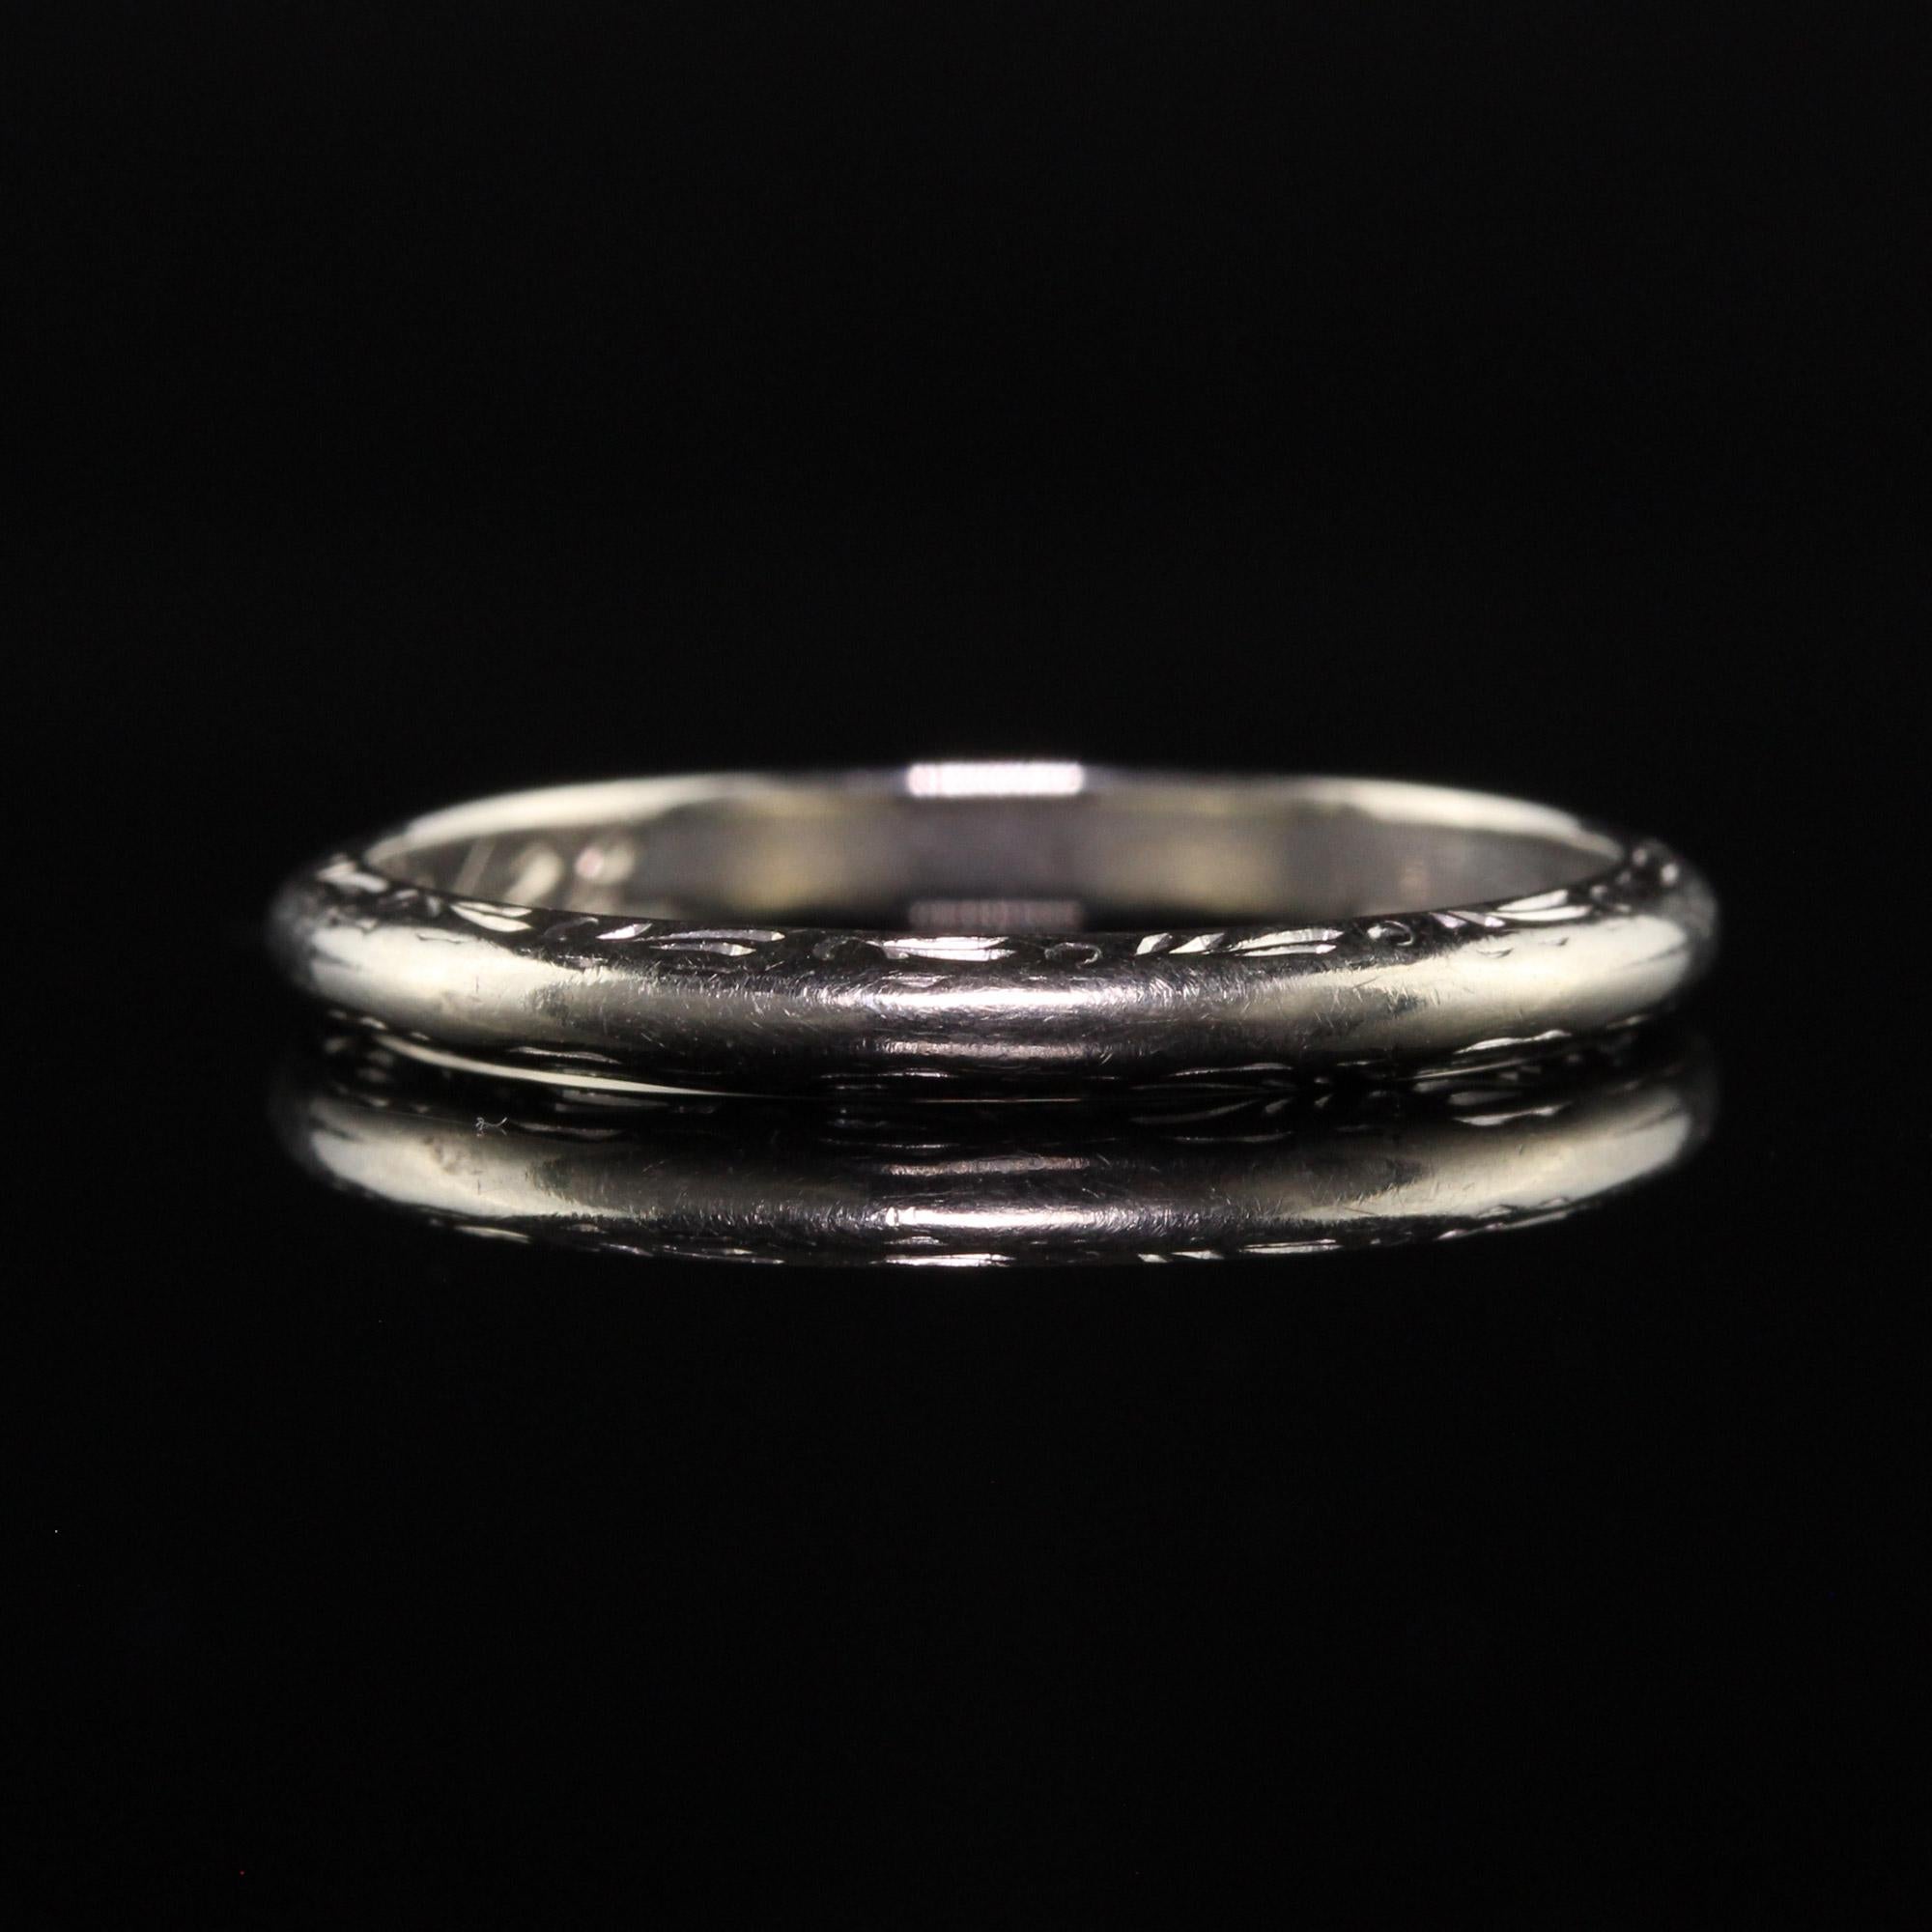 Antique Art Deco 18K White Gold Engraved Wedding Band In Good Condition For Sale In Great Neck, NY